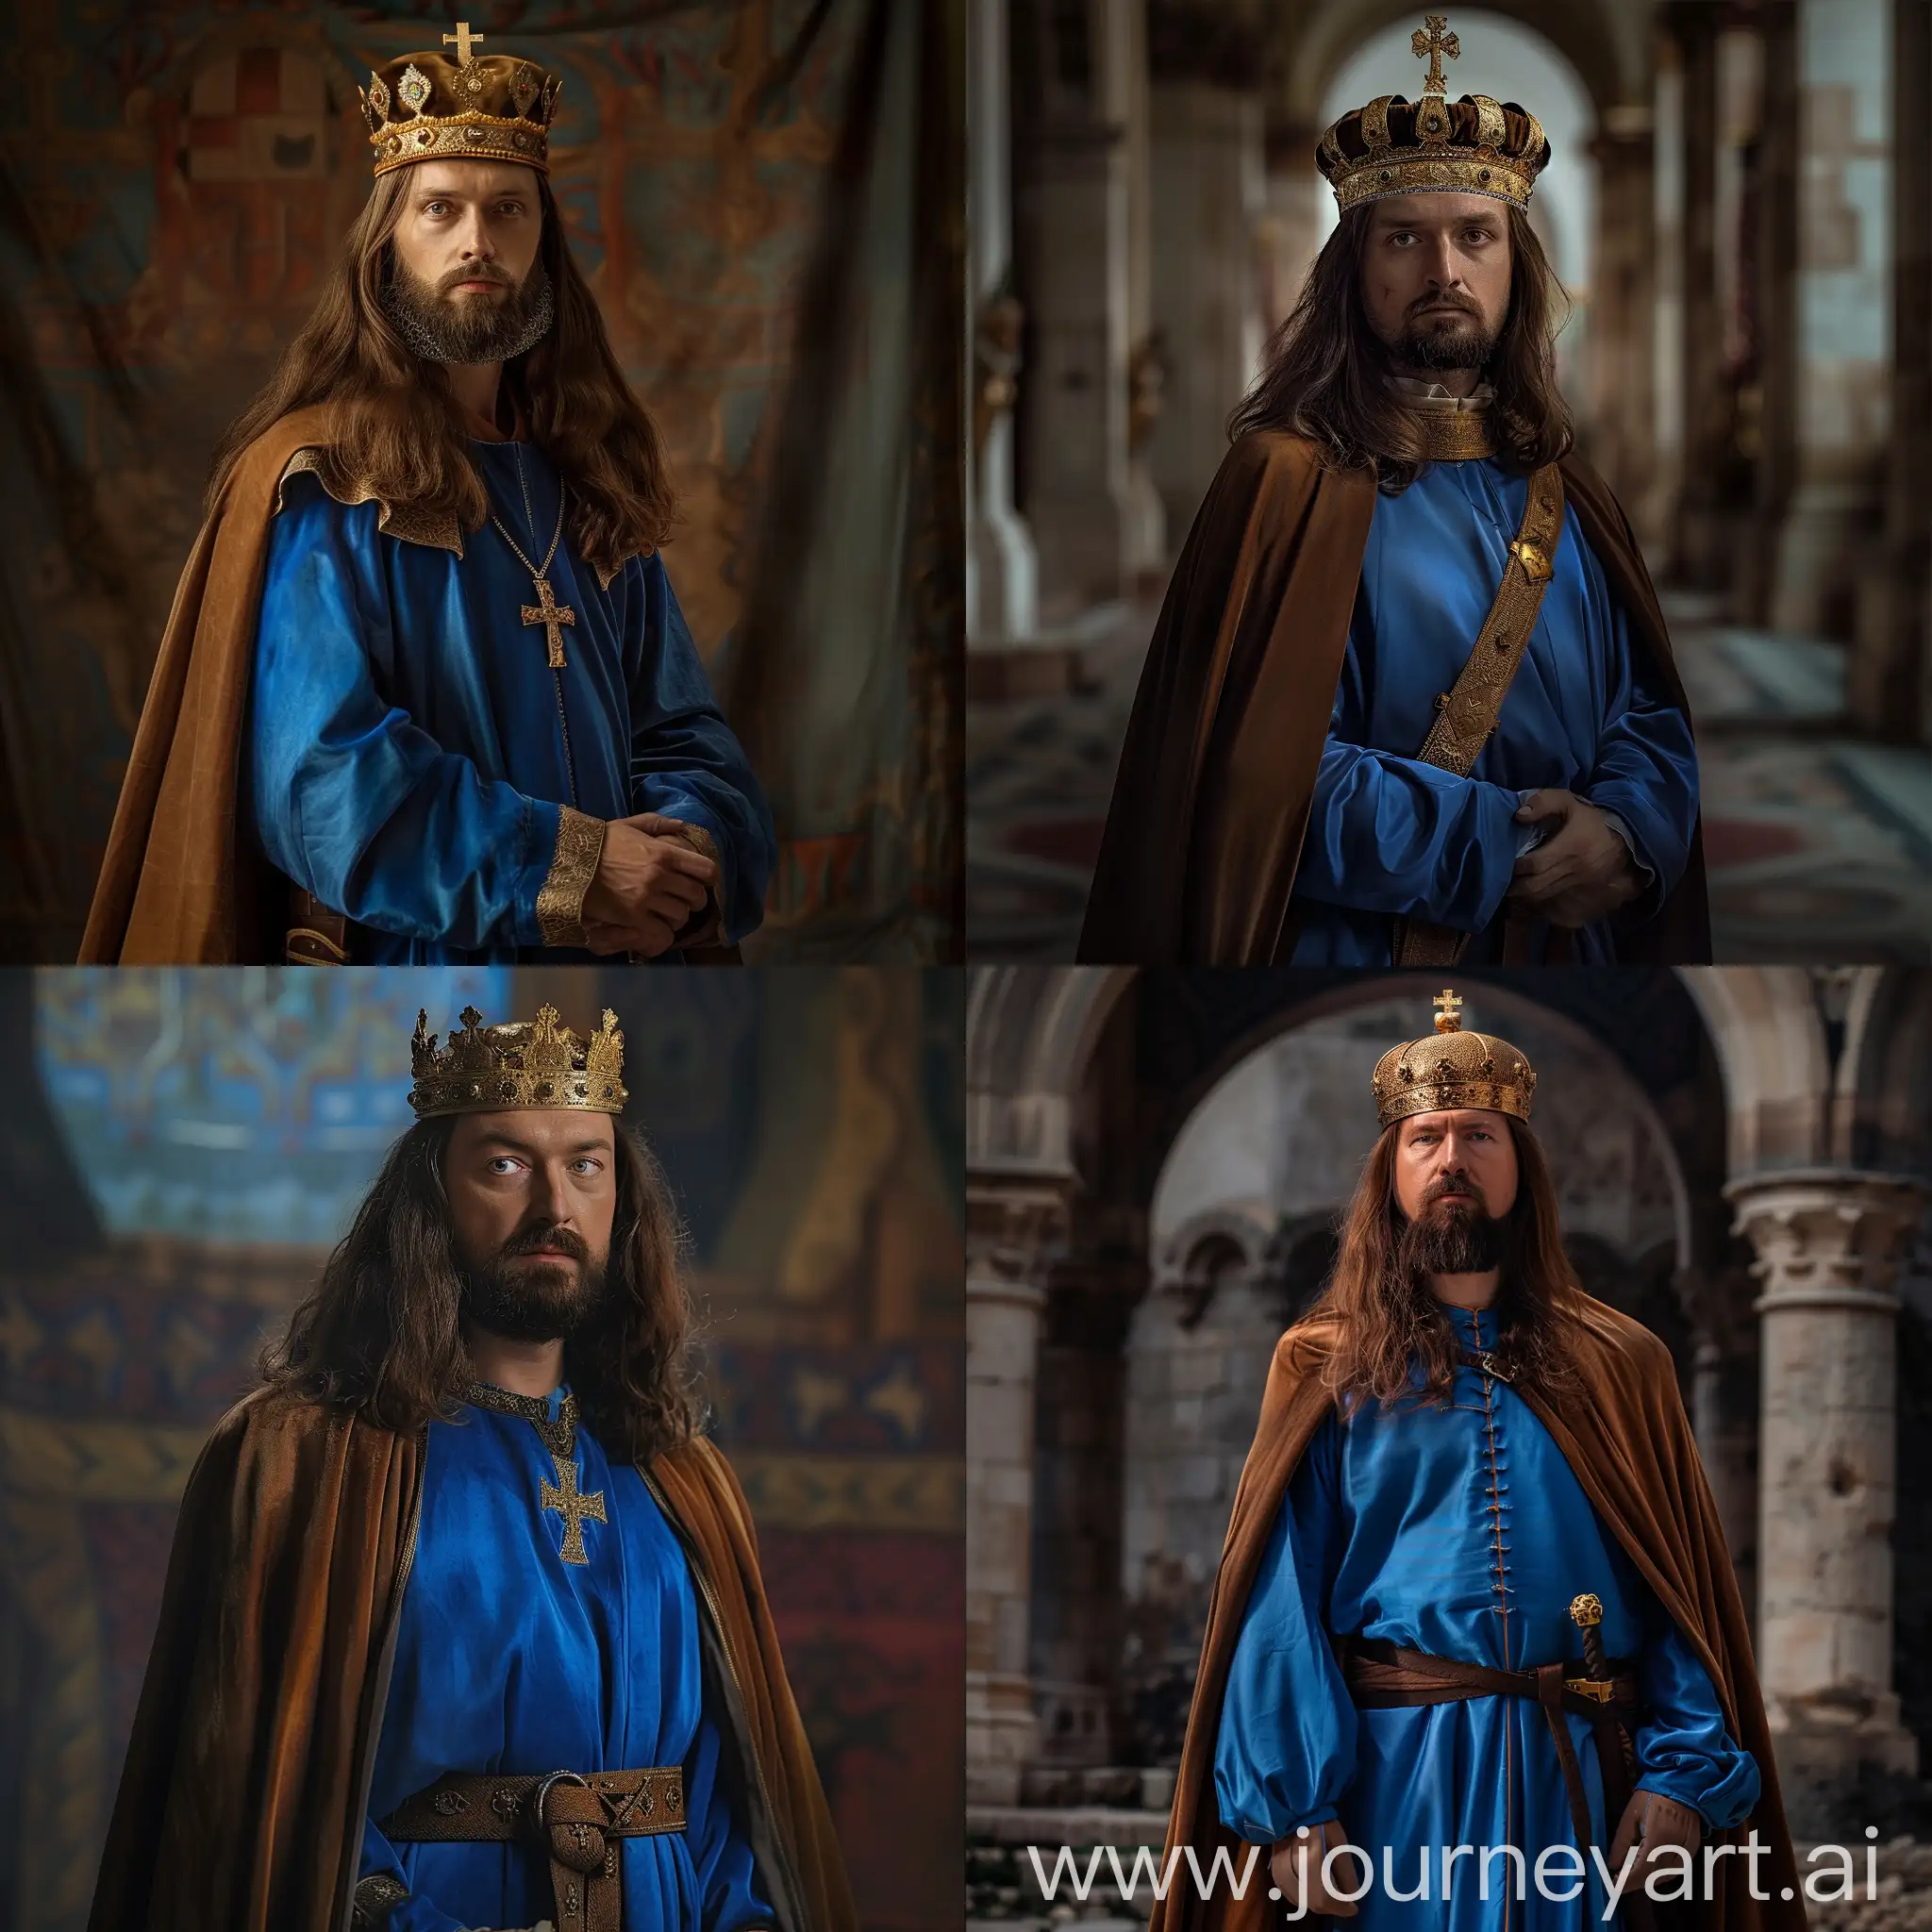 King-Stephen-I-of-Hungary-in-Regal-Blue-Silk-Robe-and-Golden-Crown-Hat